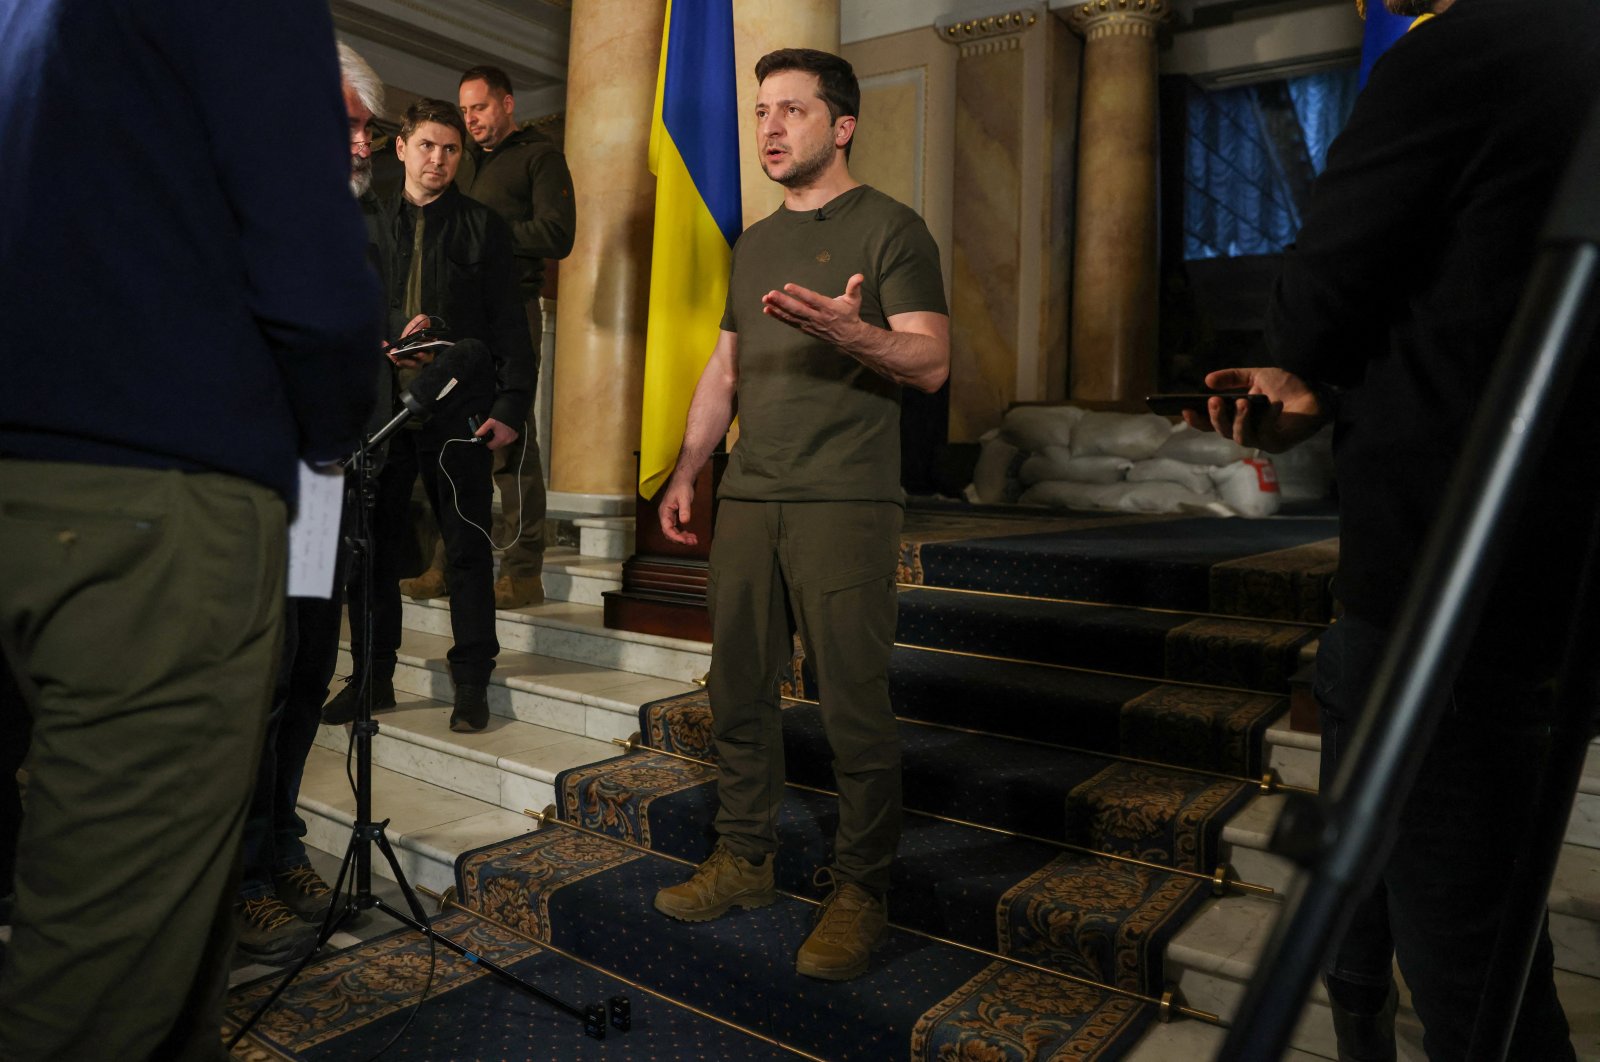 Ukrainian President Volodymyr Zelenskyy talks during an interview with Reuters in Kyiv, Ukraine, March 1, 2022. (Reuters Photo)